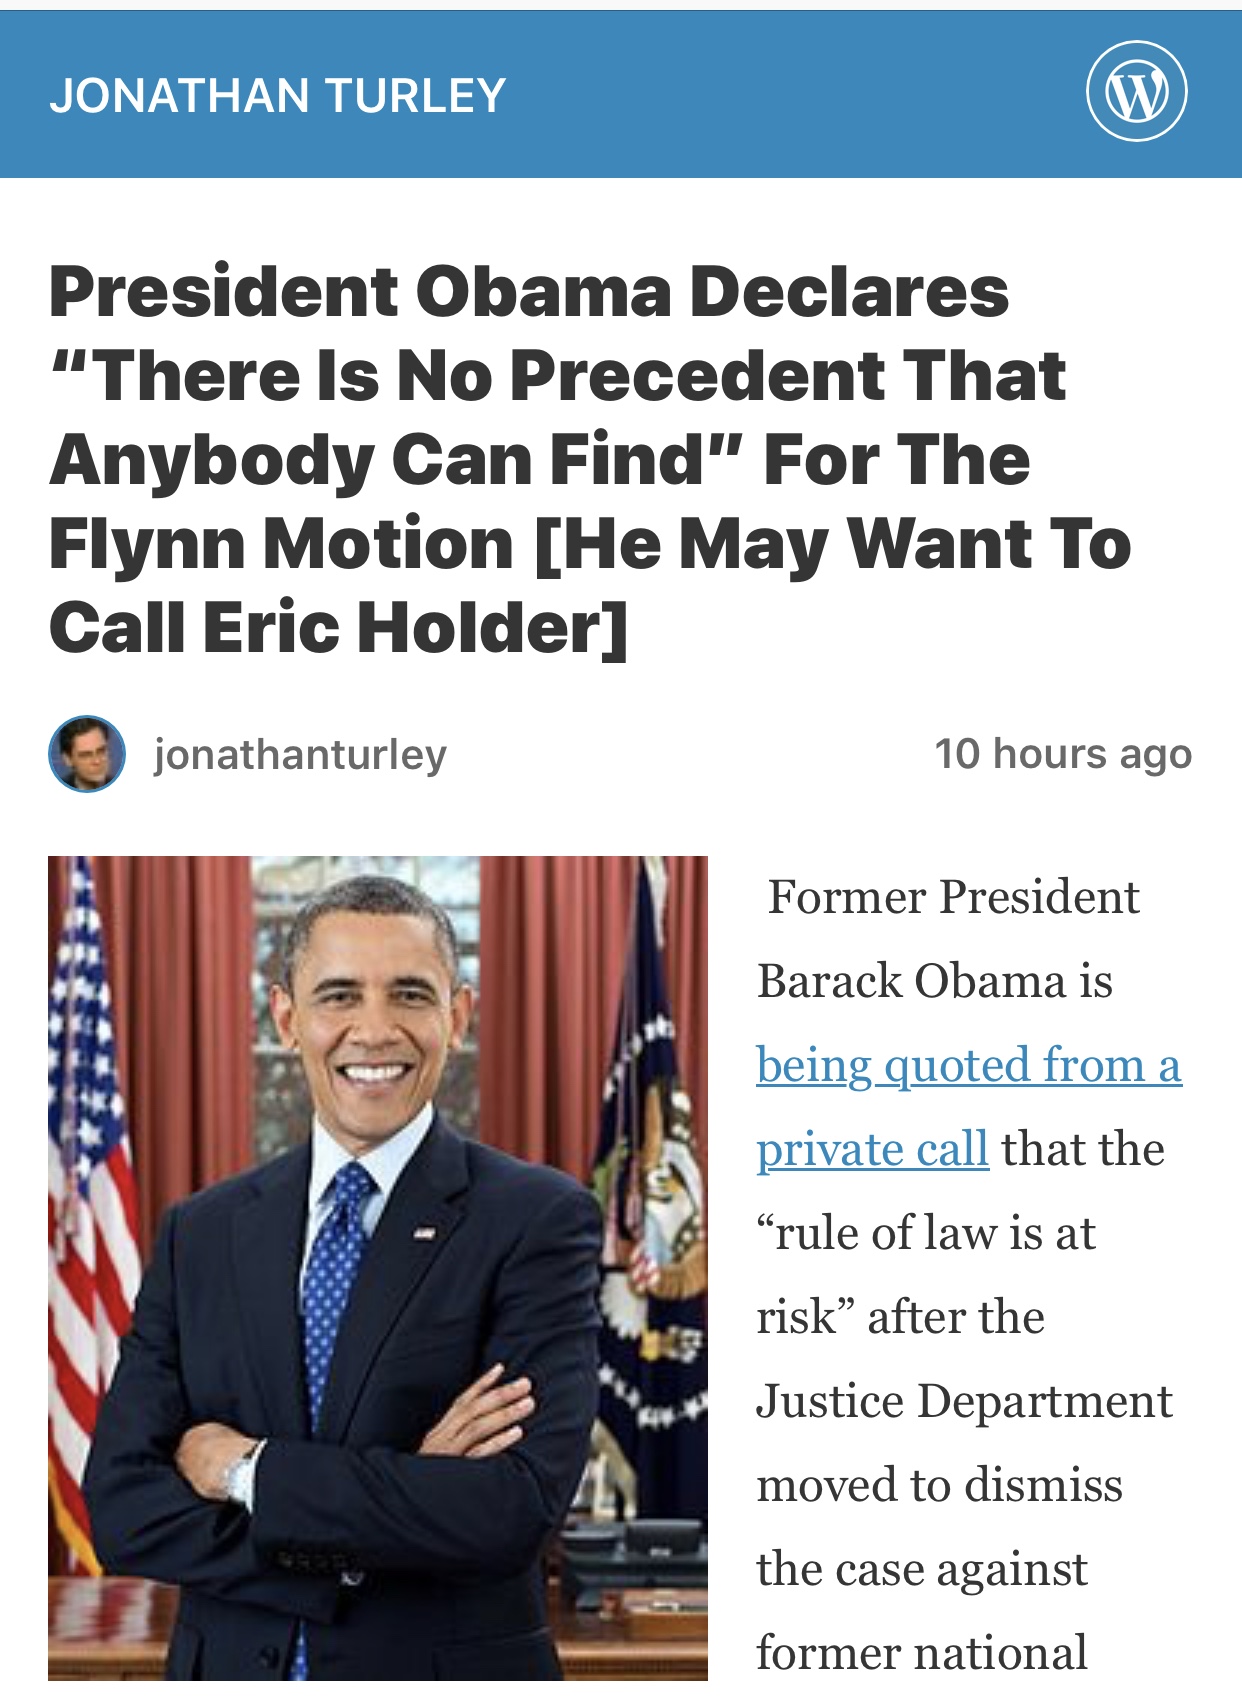 President Obama Declares “There Is No Precedent That Anybody Can Find” For The Flynn Motion [He May Want To Call Eric Holder] – JONATHAN TURLEY